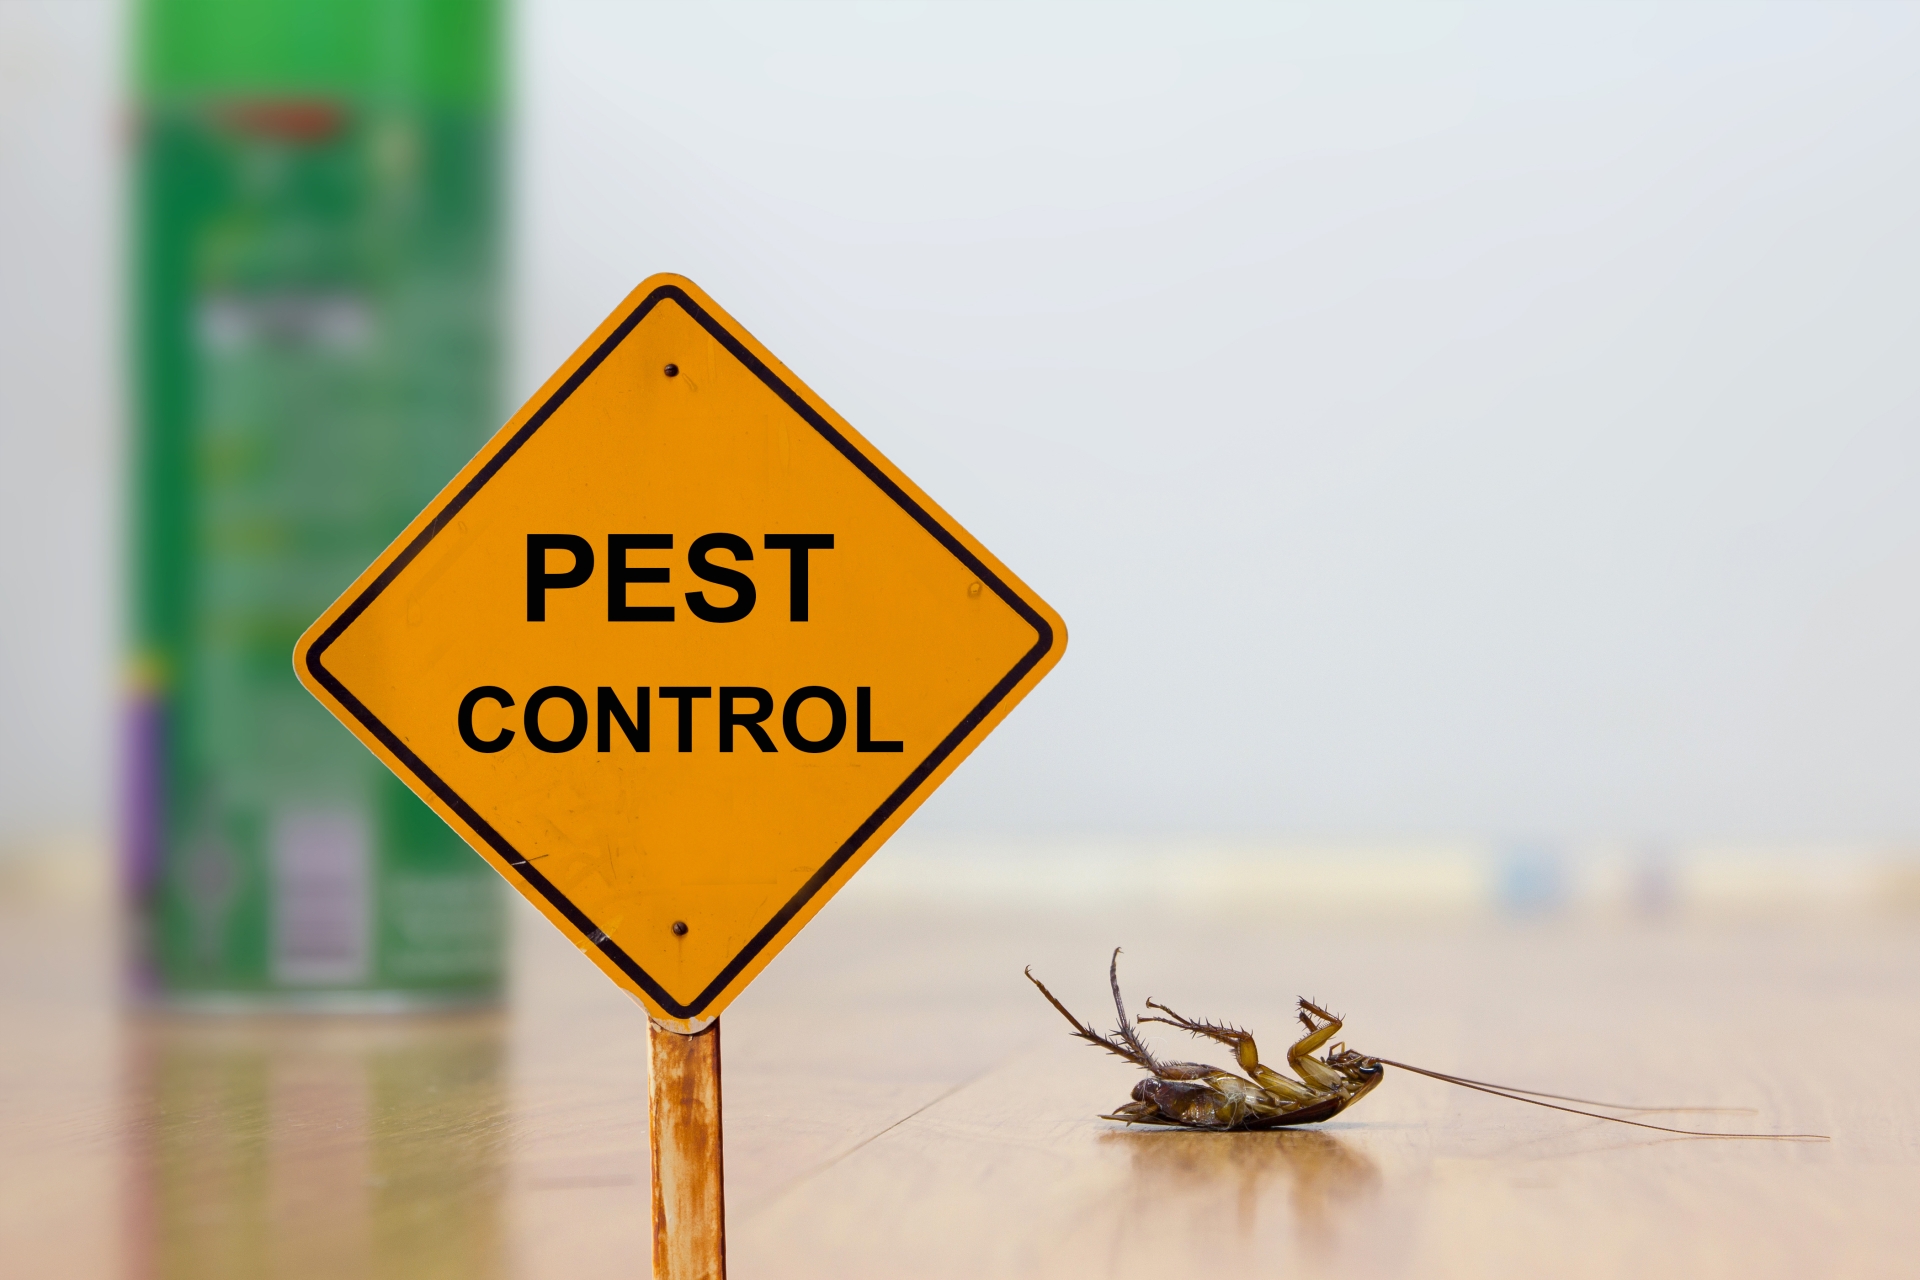 24 Hour Pest Control, Pest Control in Falconwood, Welling, DA16. Call Now 020 8166 9746